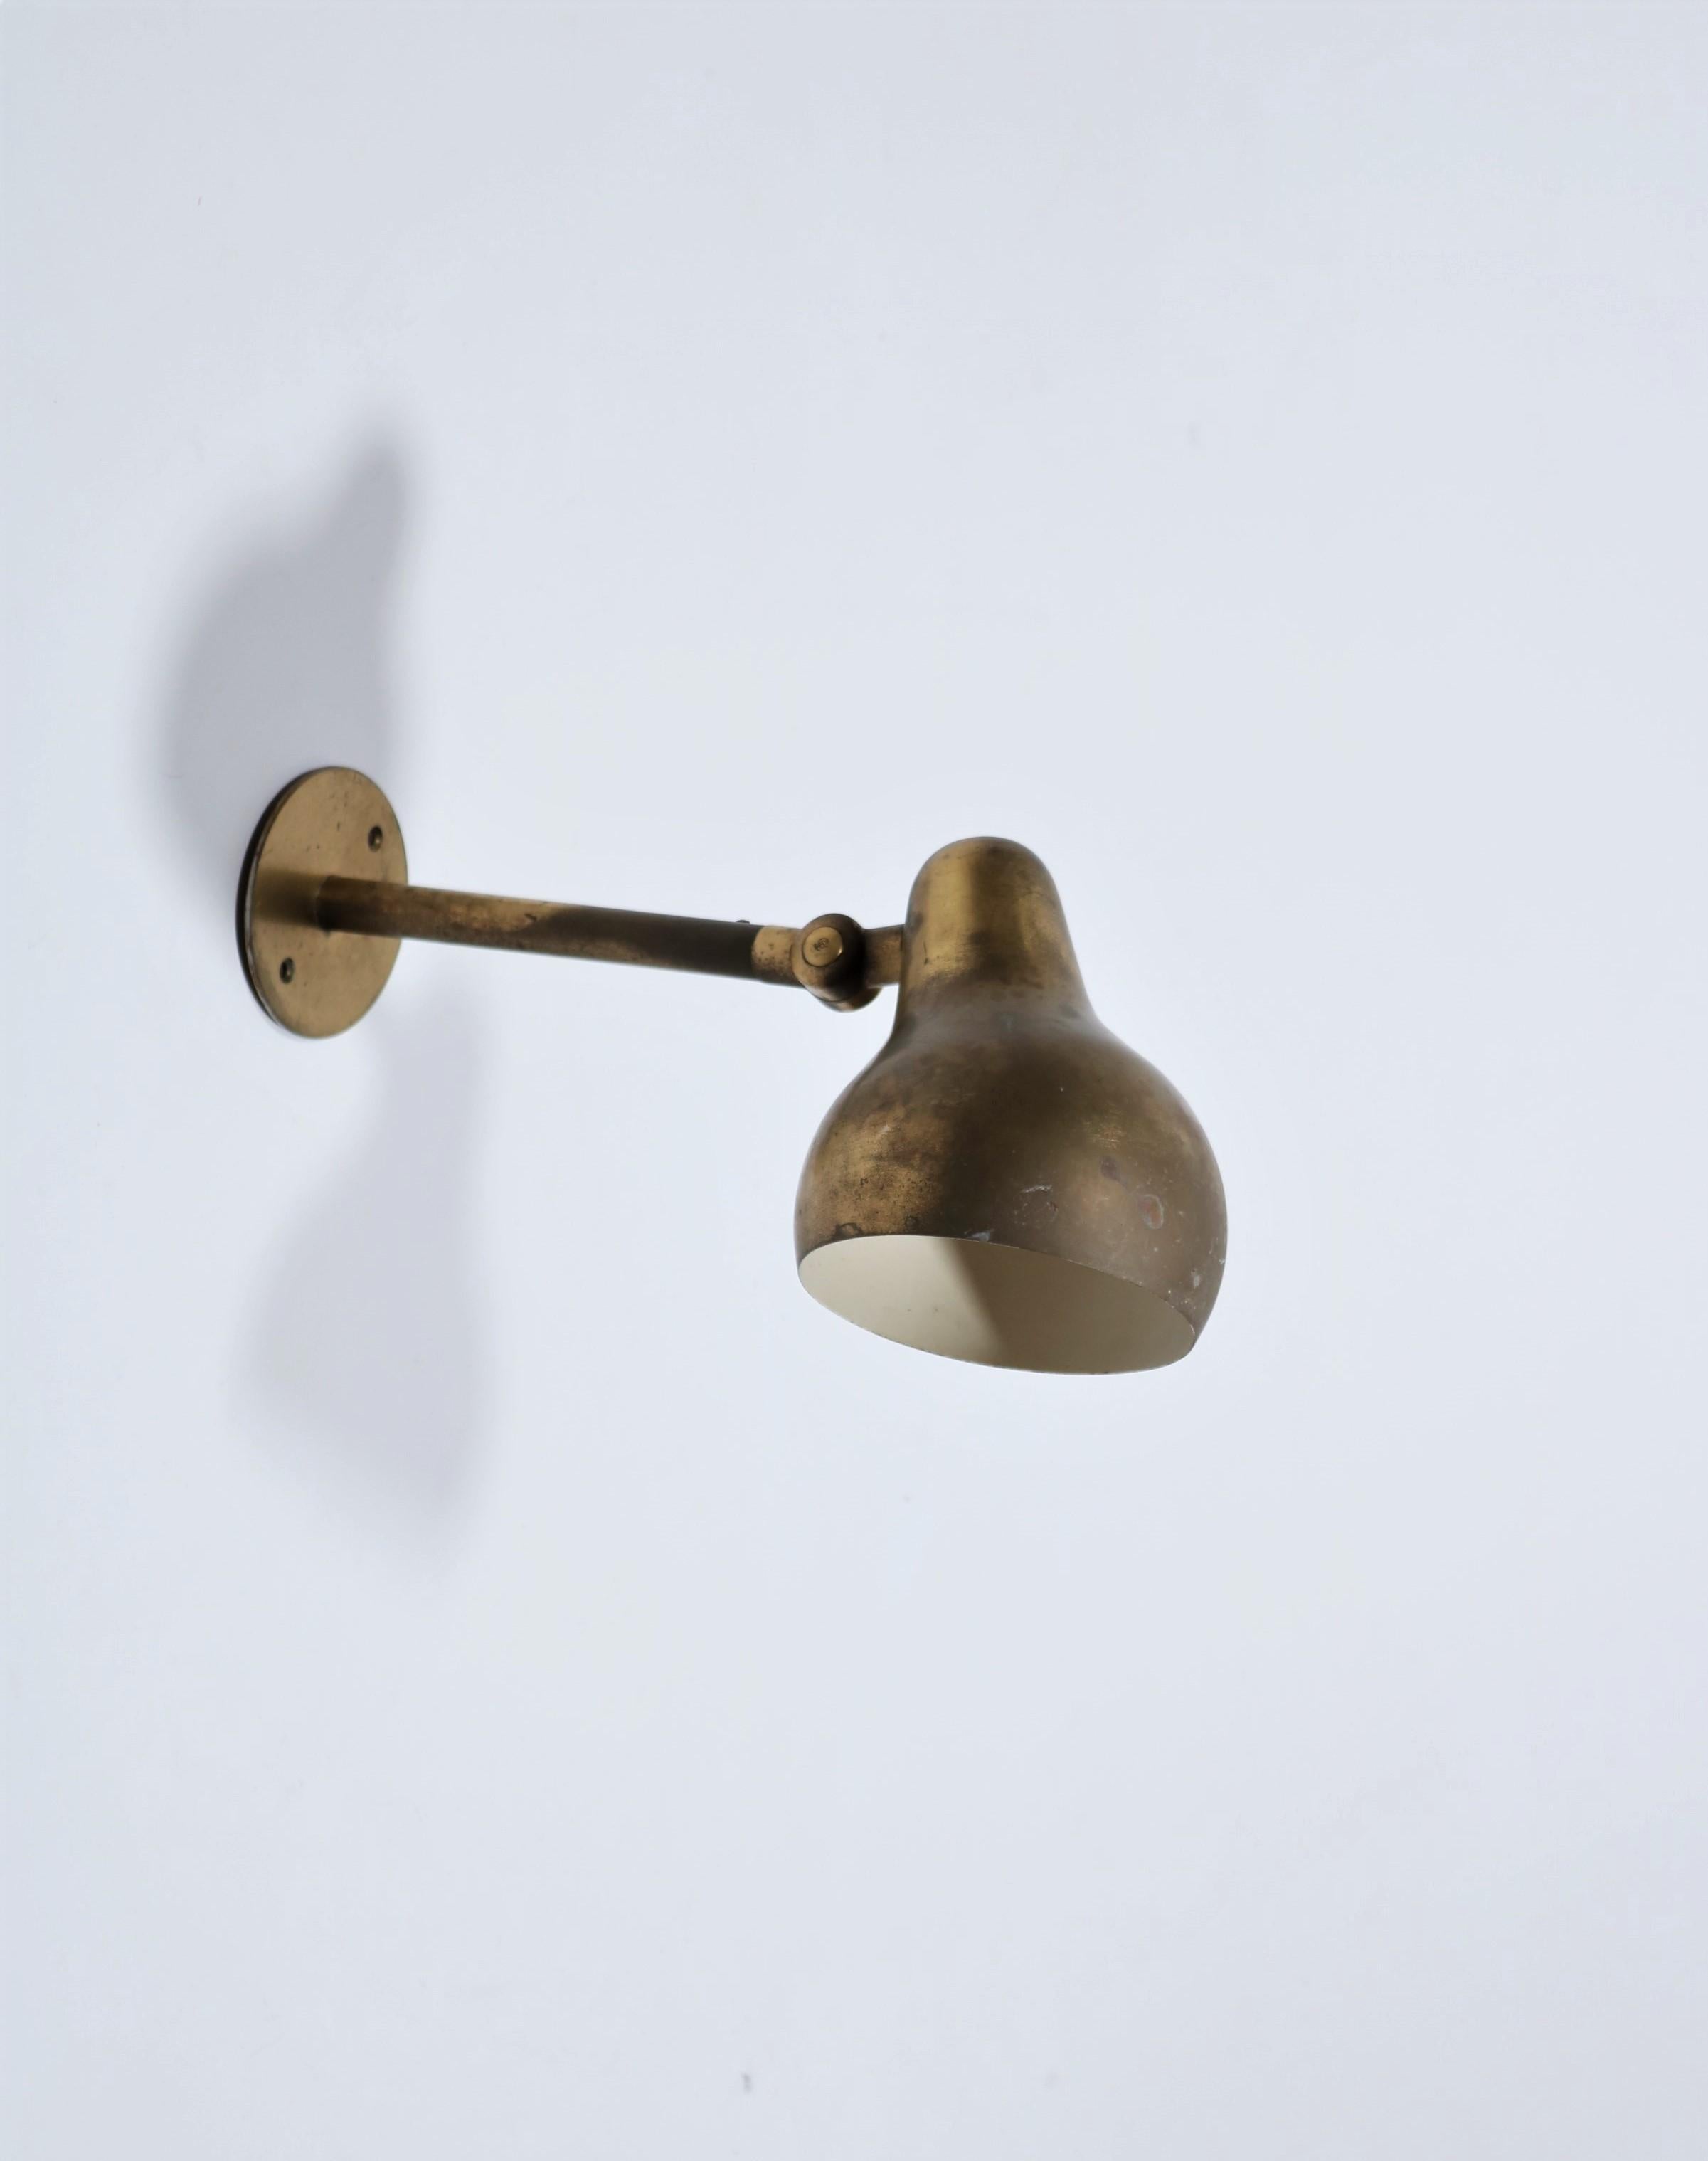 Beautiful and rare 1940s wall lamp in patinated brass by Vilhelm Lauritzen. The lamp shade can be adjusted. Produced by Louis Poulsen, Copenhagen. Marked with 